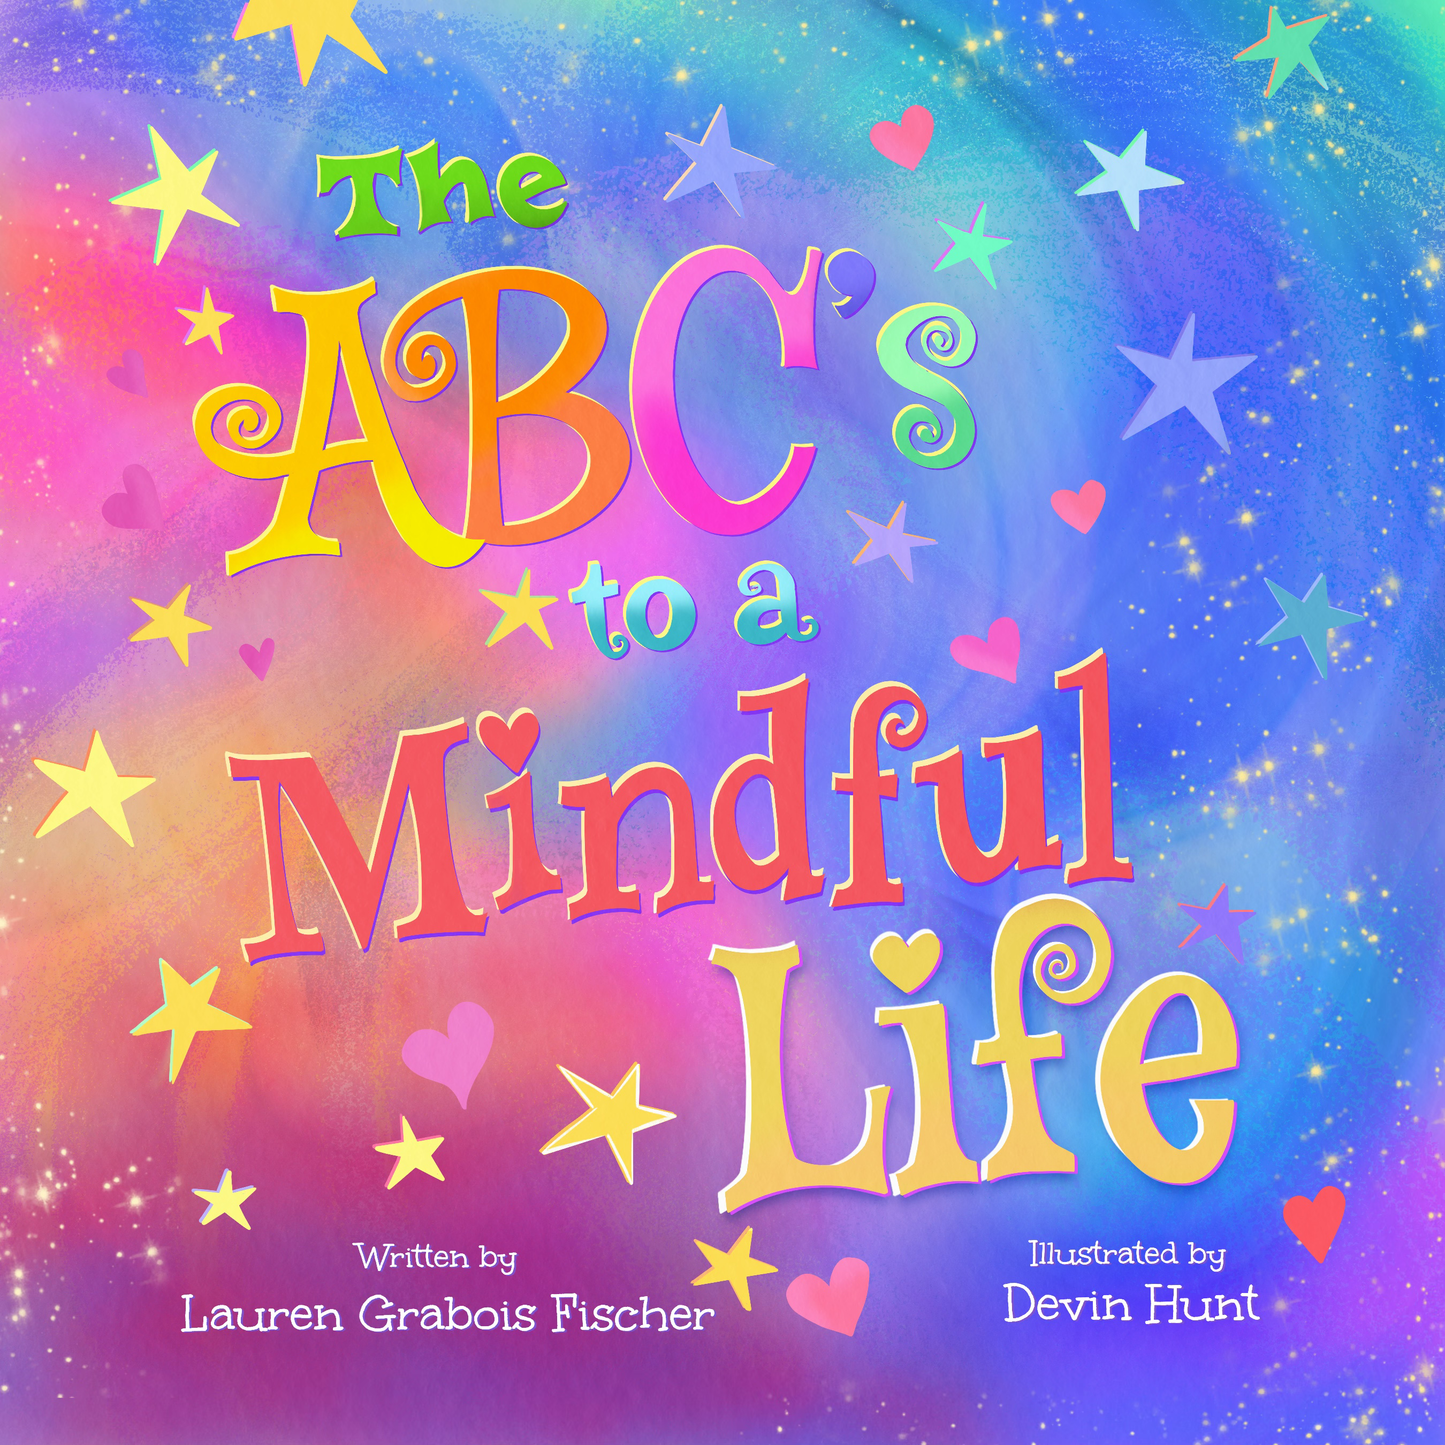 The ABC's to a Mindful Life (Schools)